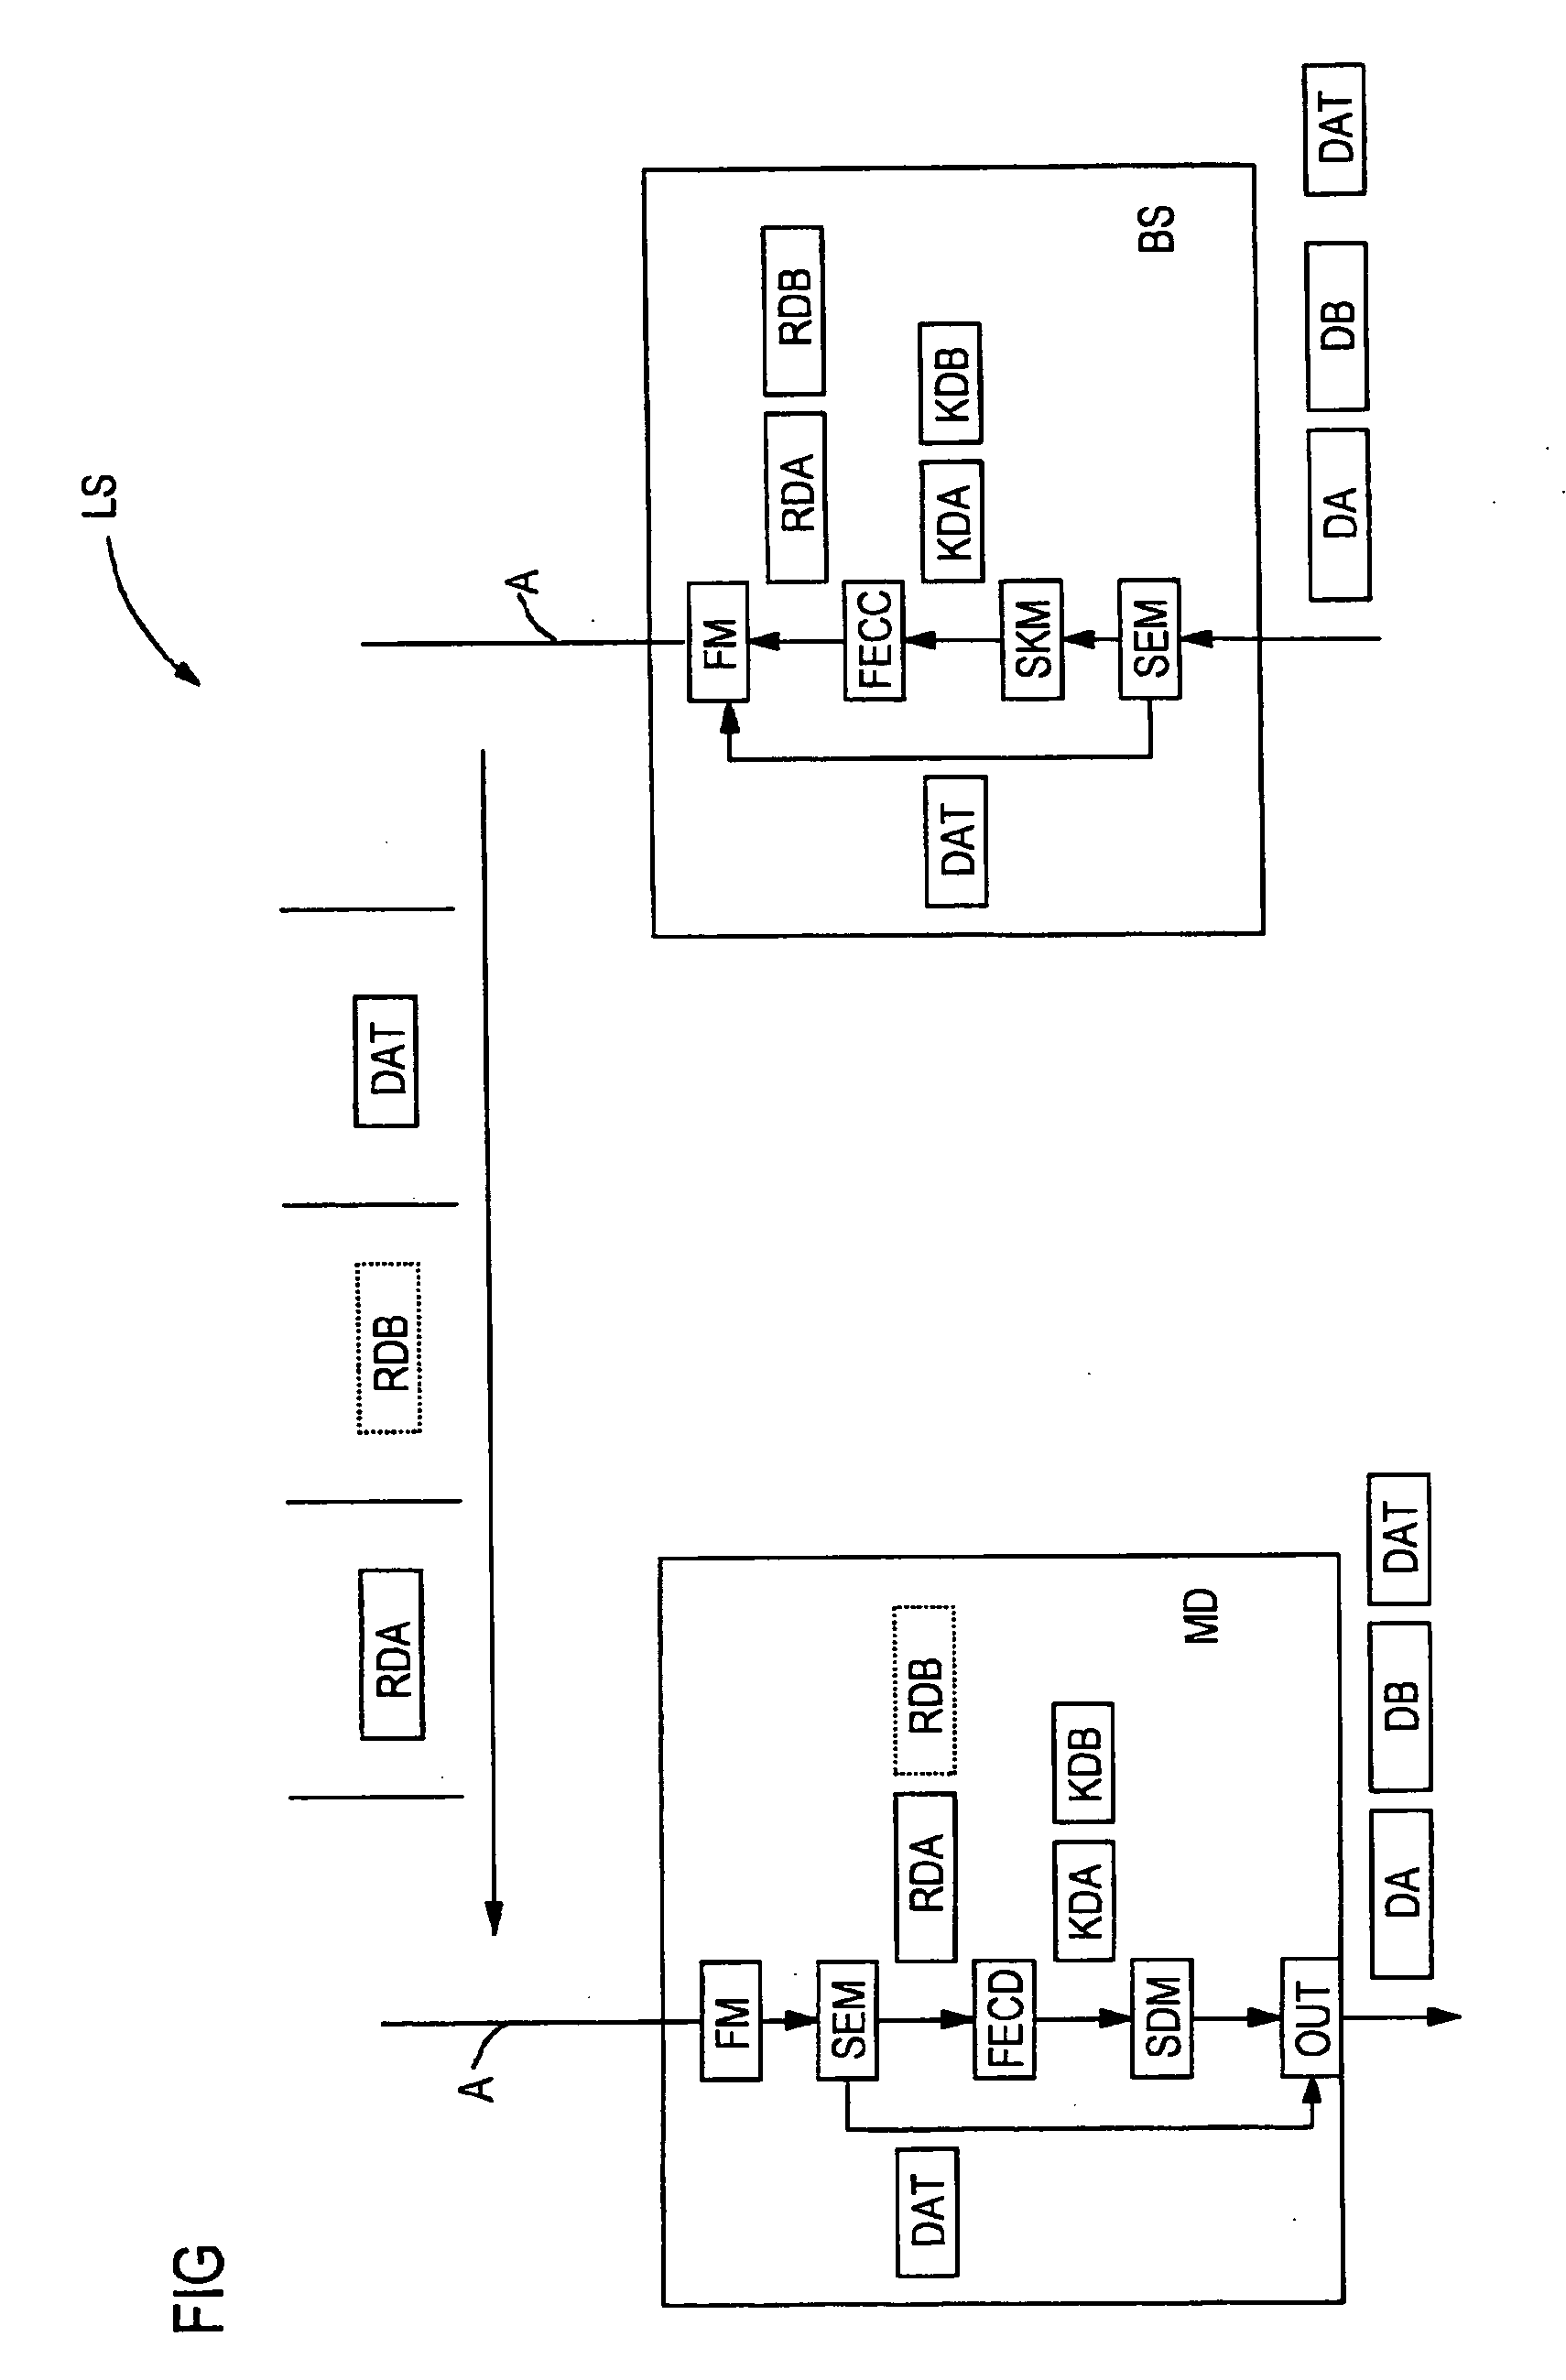 Method for improving the quality of a voice transmission via an air interface